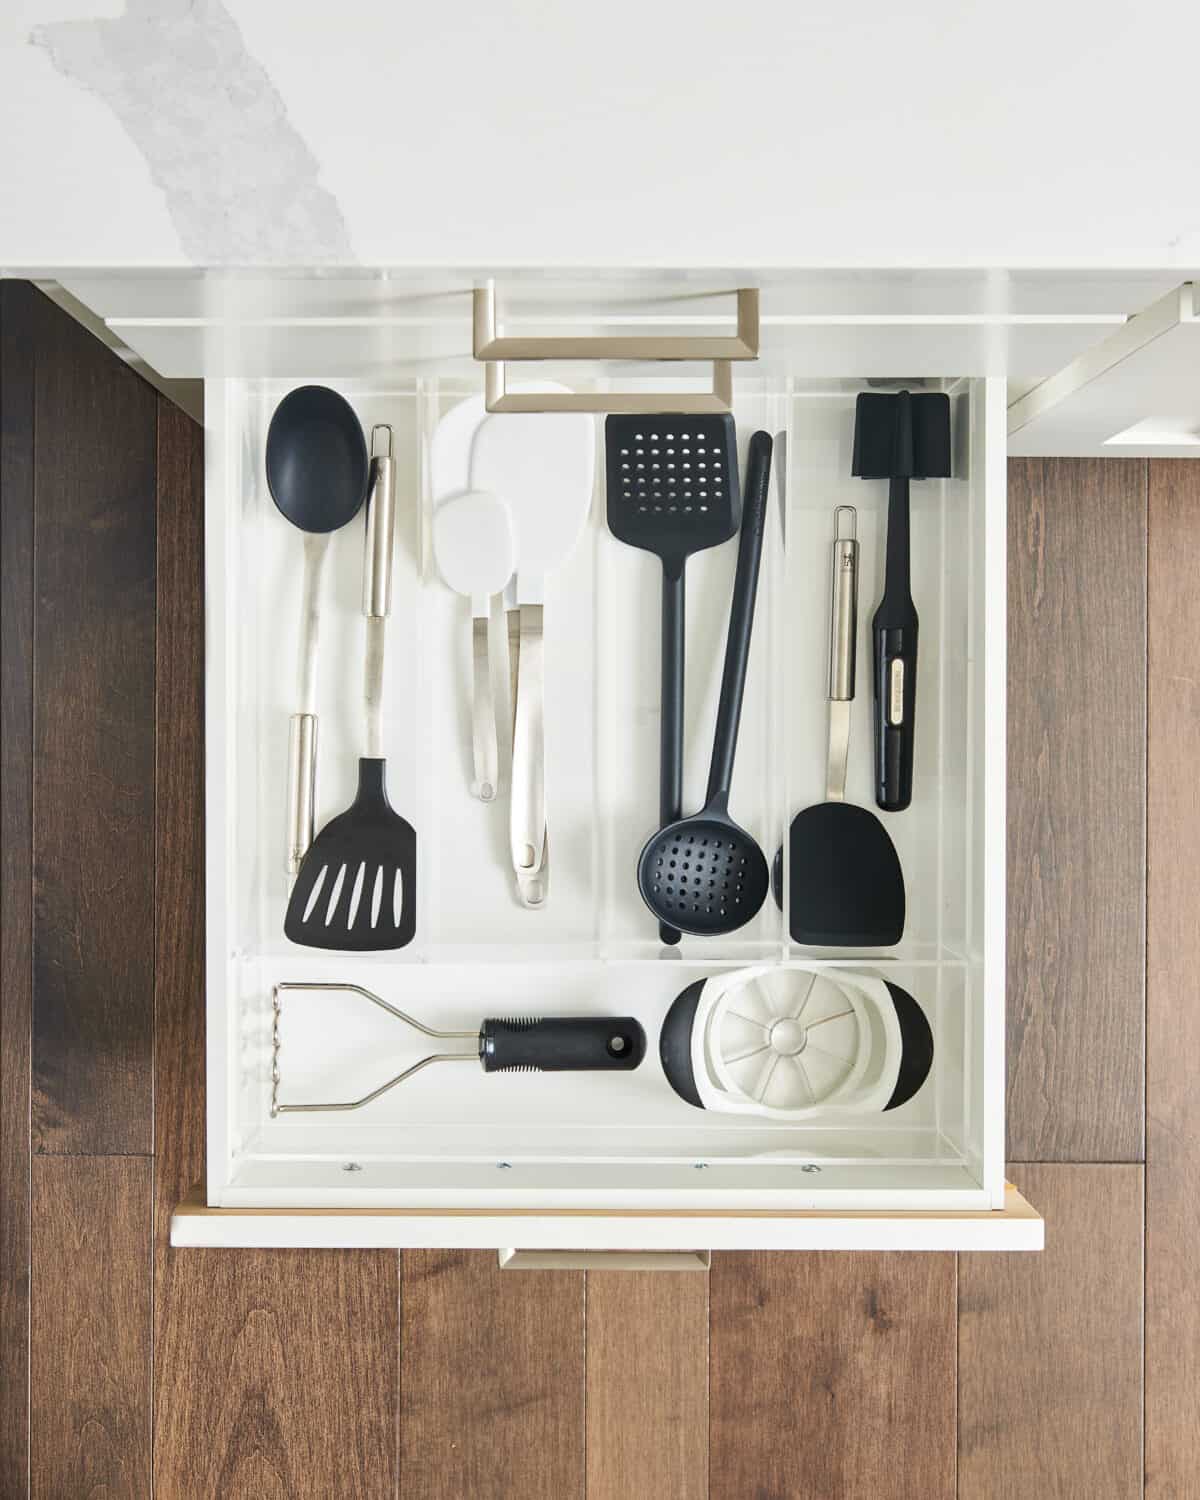 various kitchen tools organized in a drawer.